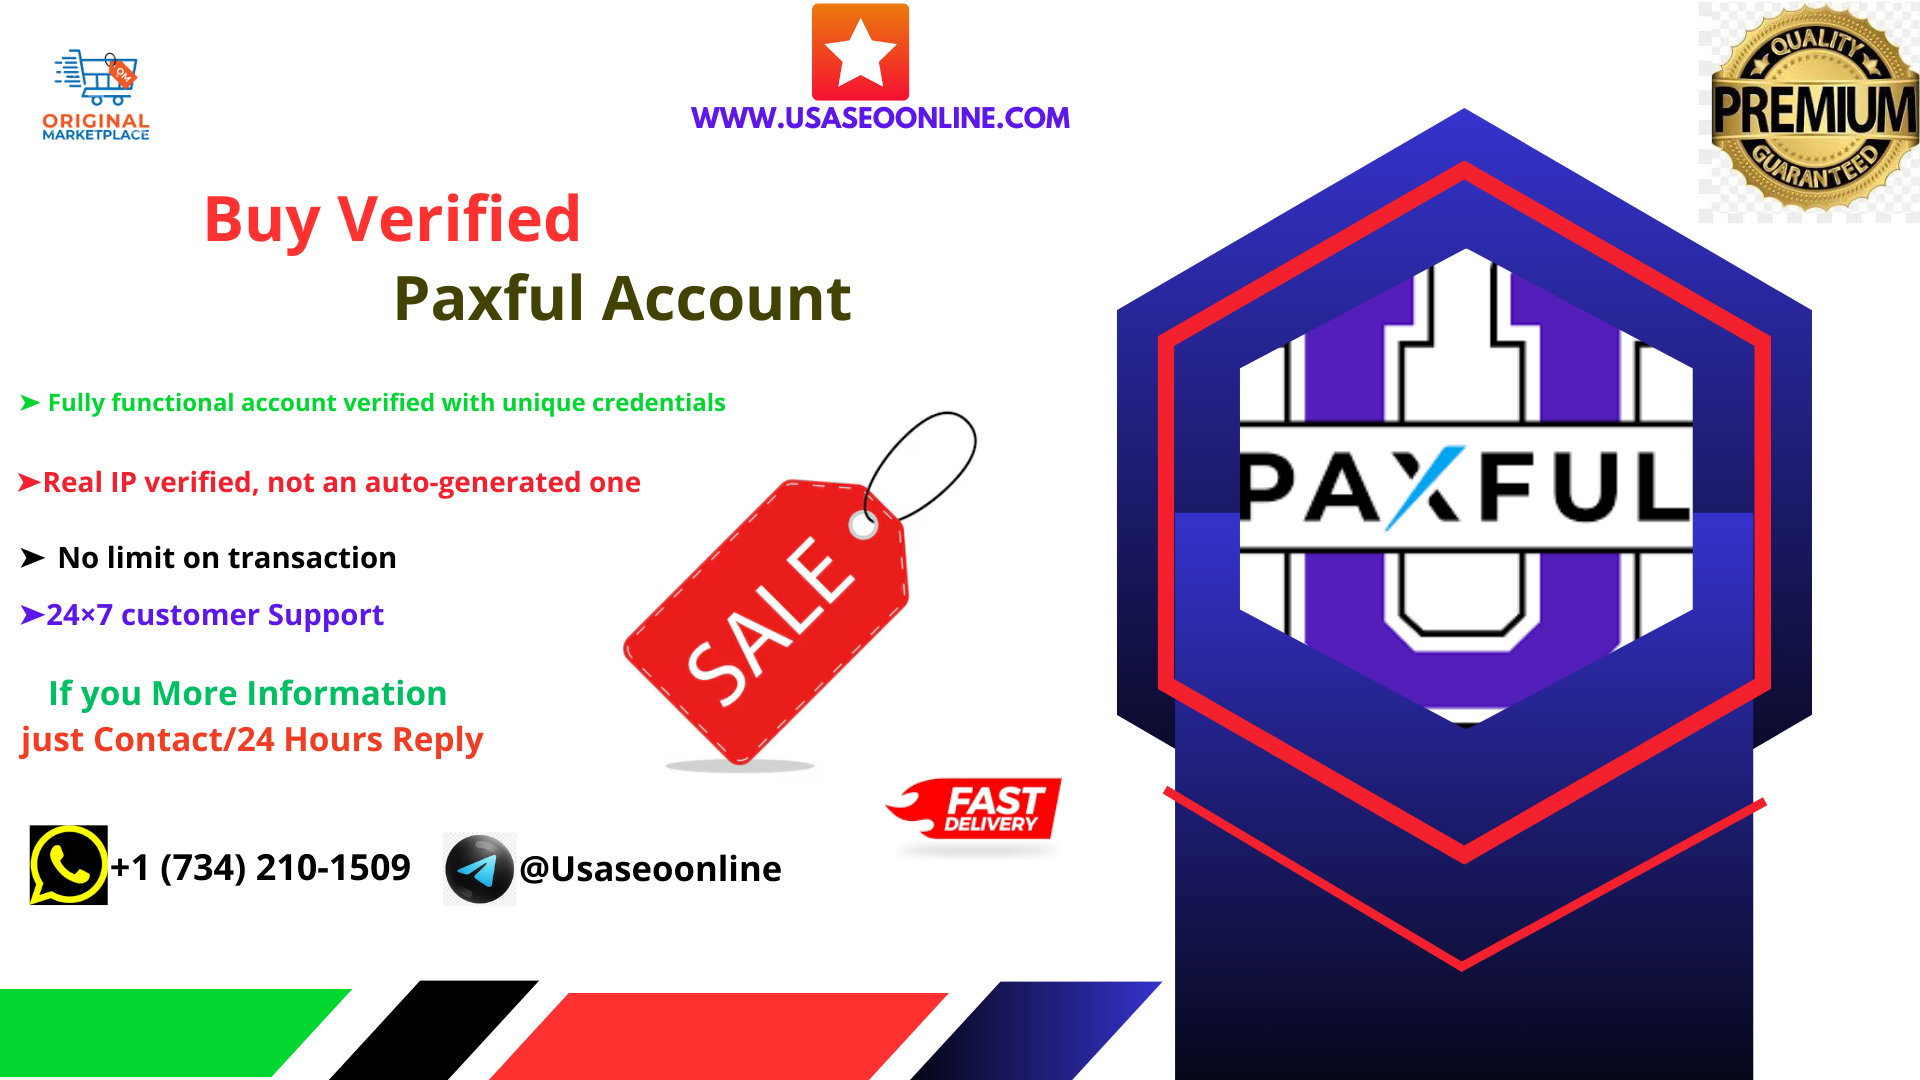 Buy Verified Paxful Accounts - USA SEO Online